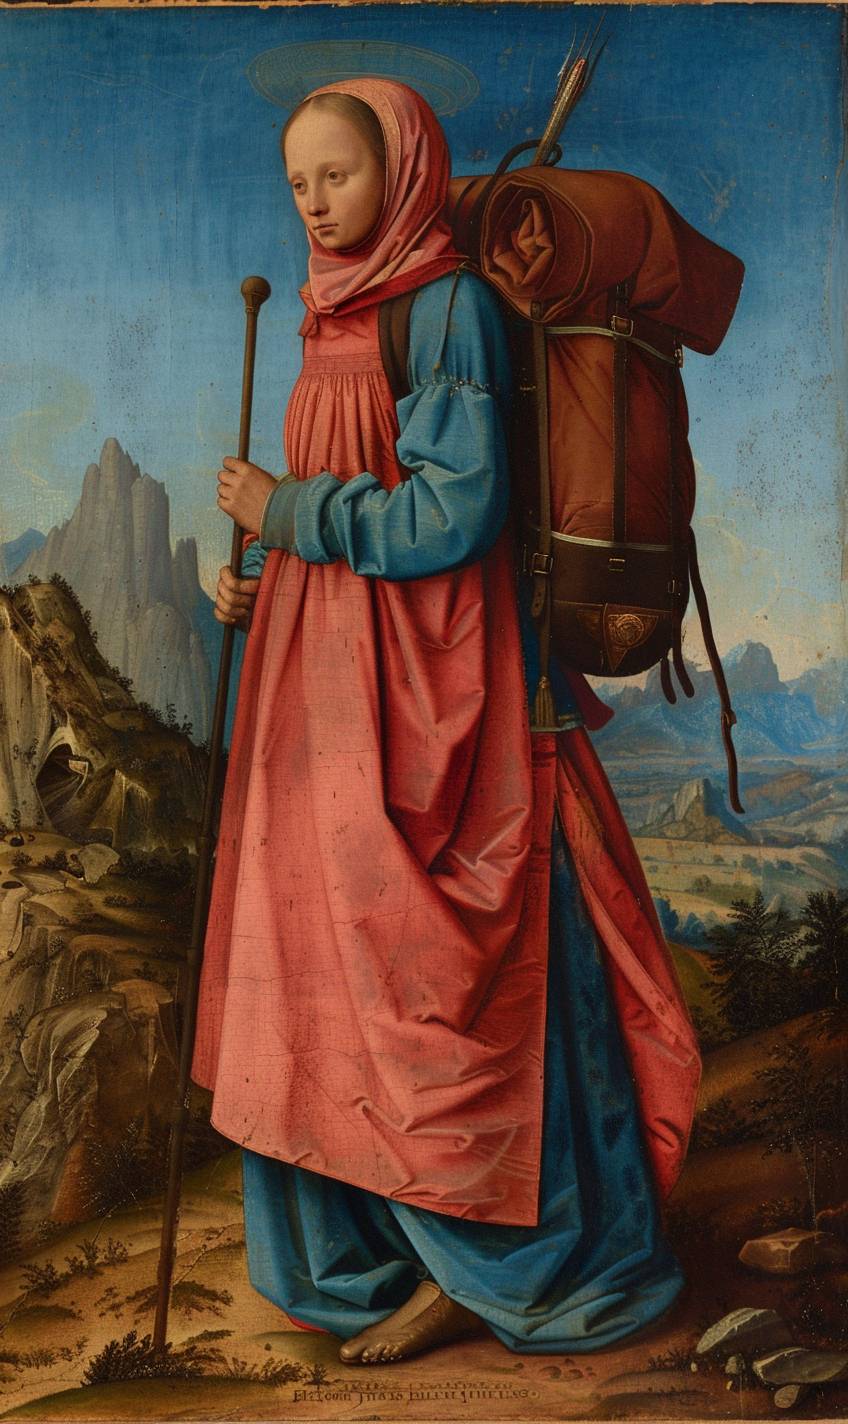 Painting by Antonello da Messina depicting a lady backpacker traveler